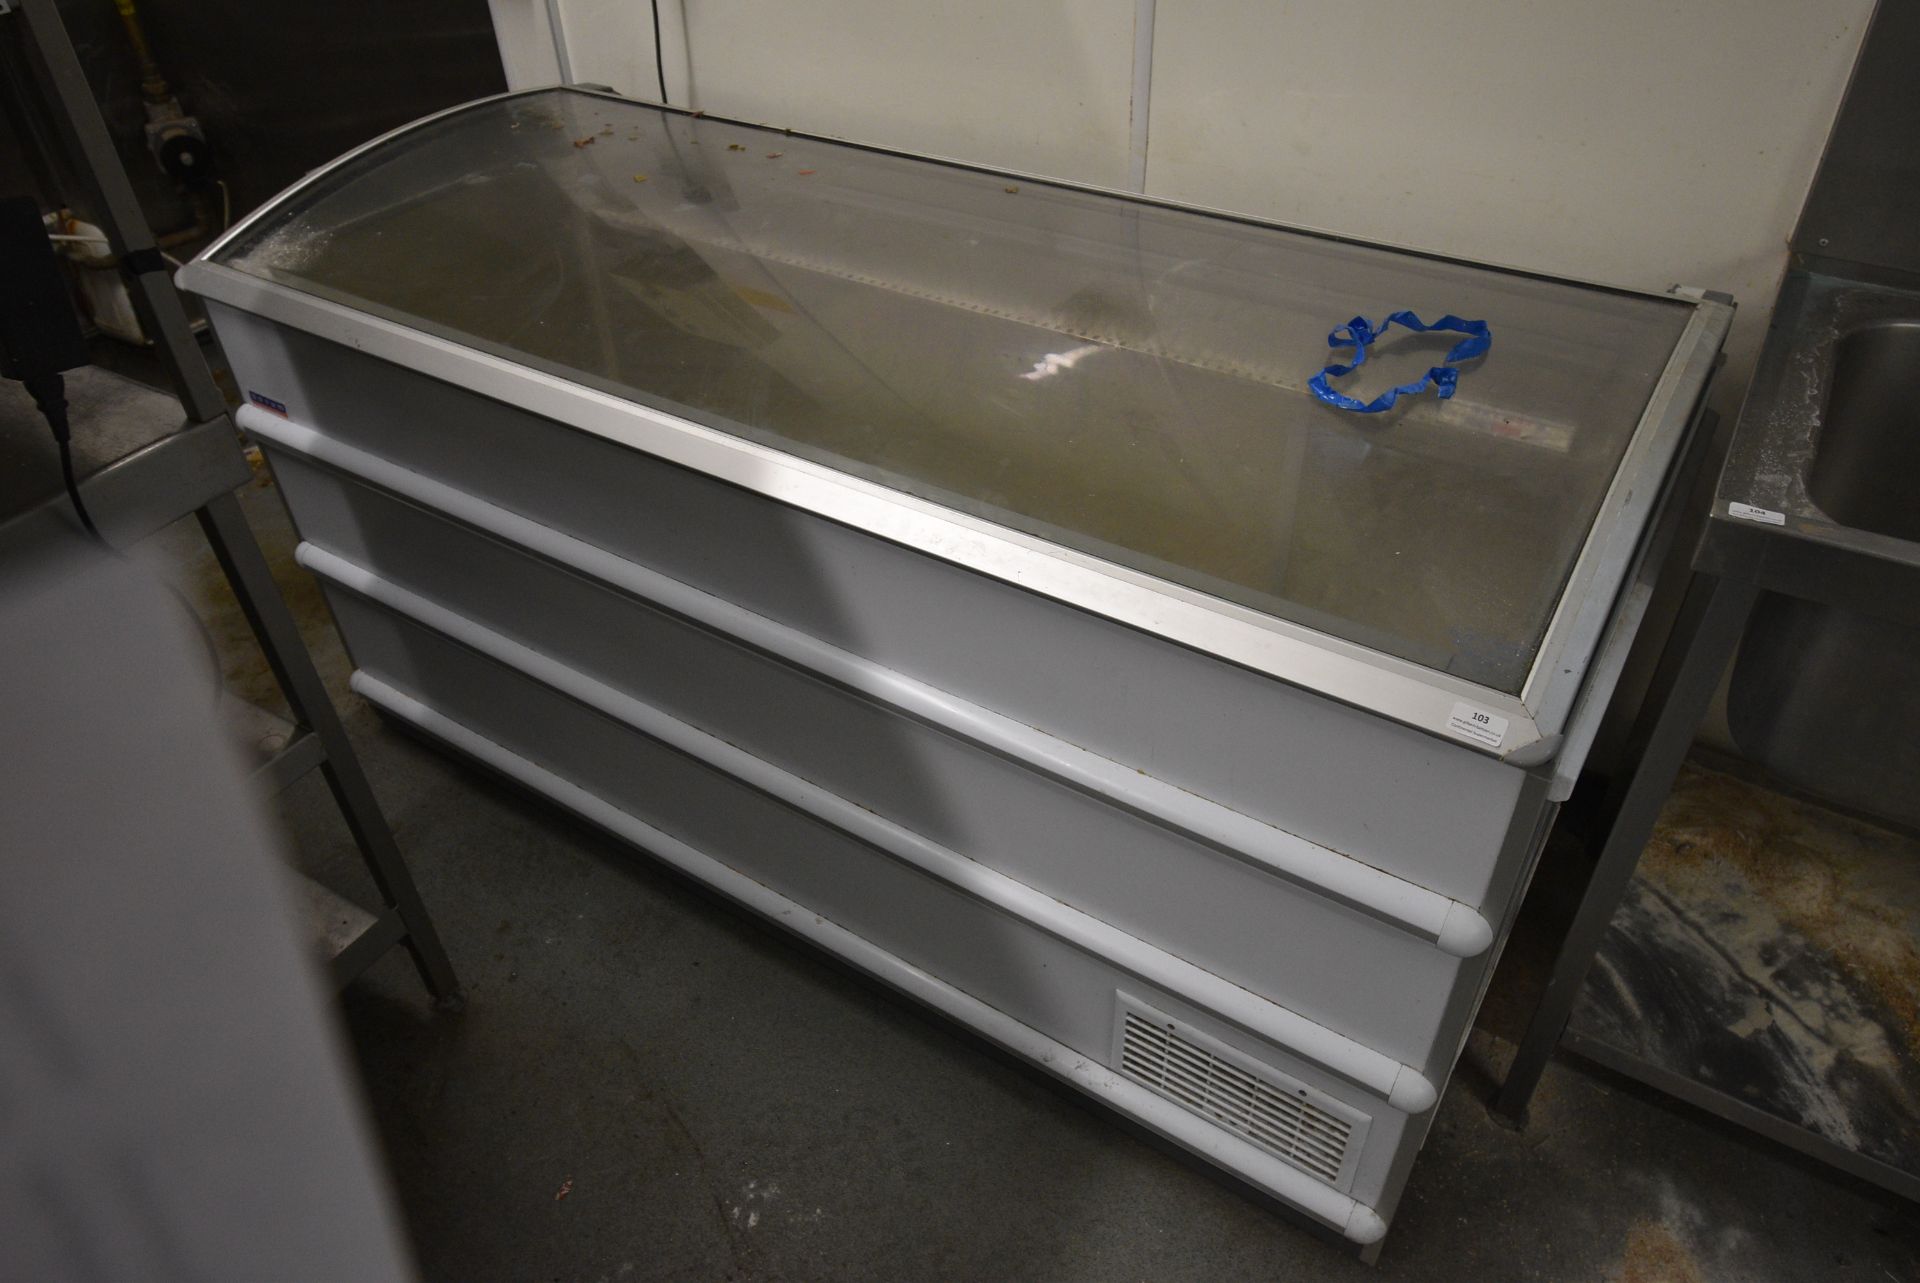 Novum Display Chest Freezer with Transparent Dome Top Lid - Image 2 of 2